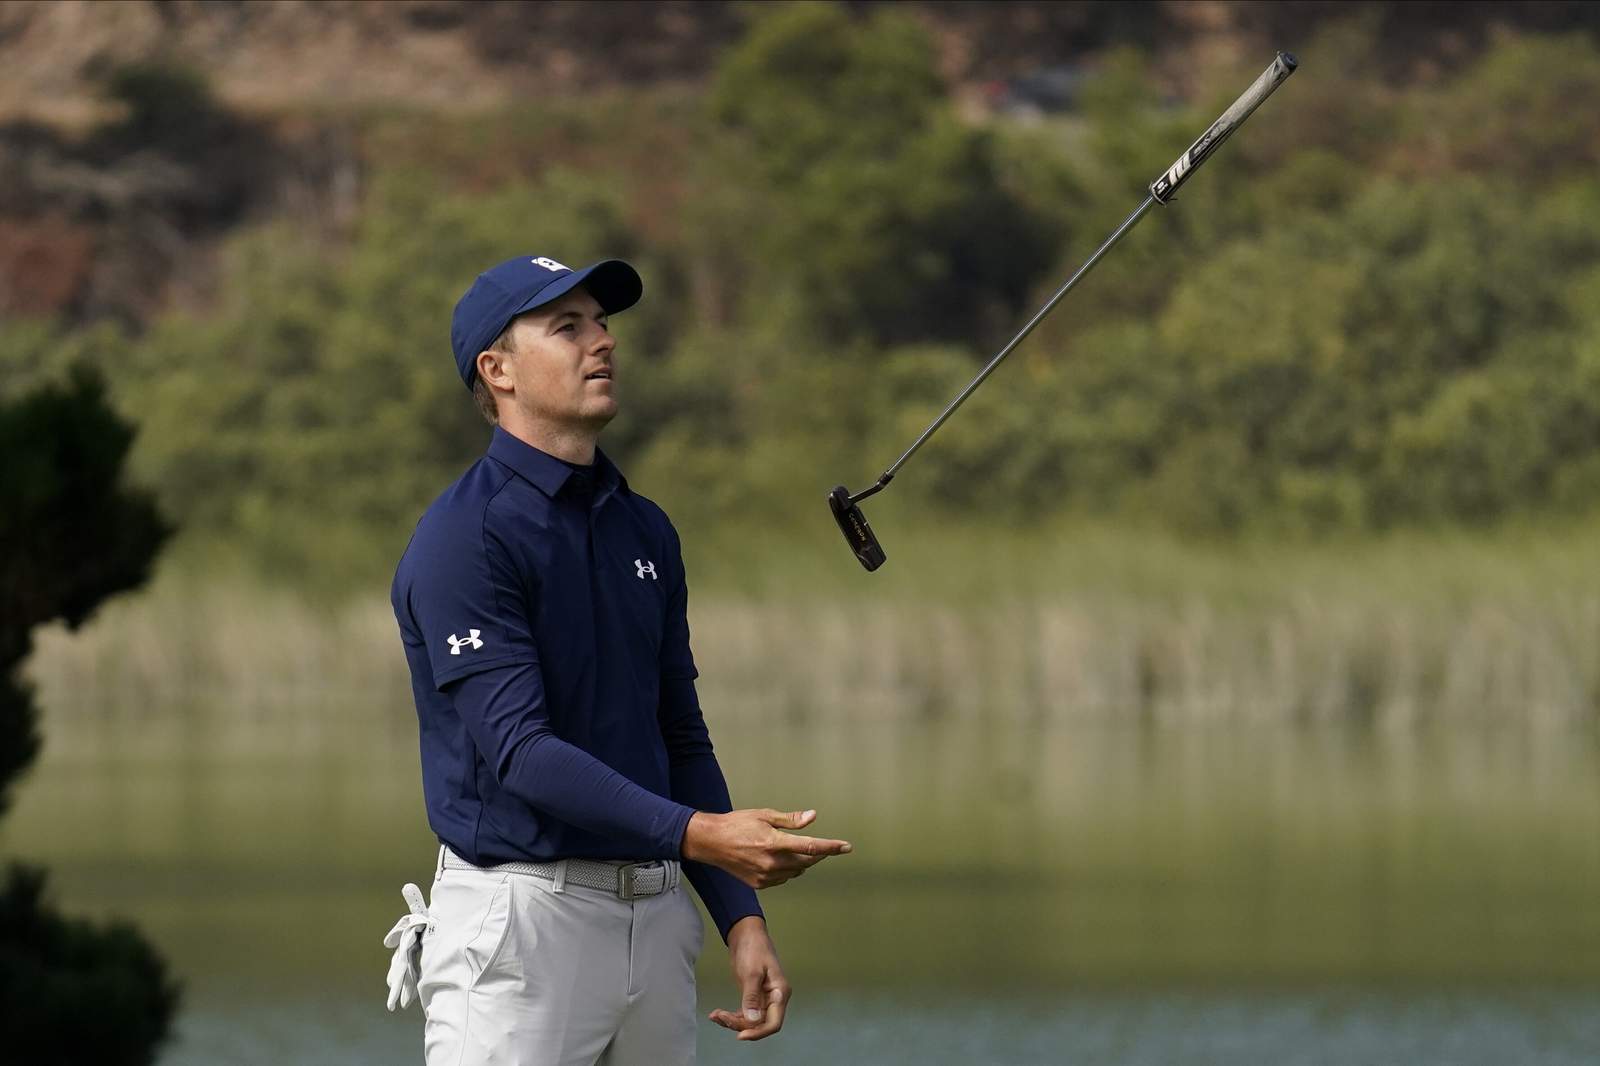 The Latest: Spieth says to expect fireworks on back 9 at PGA